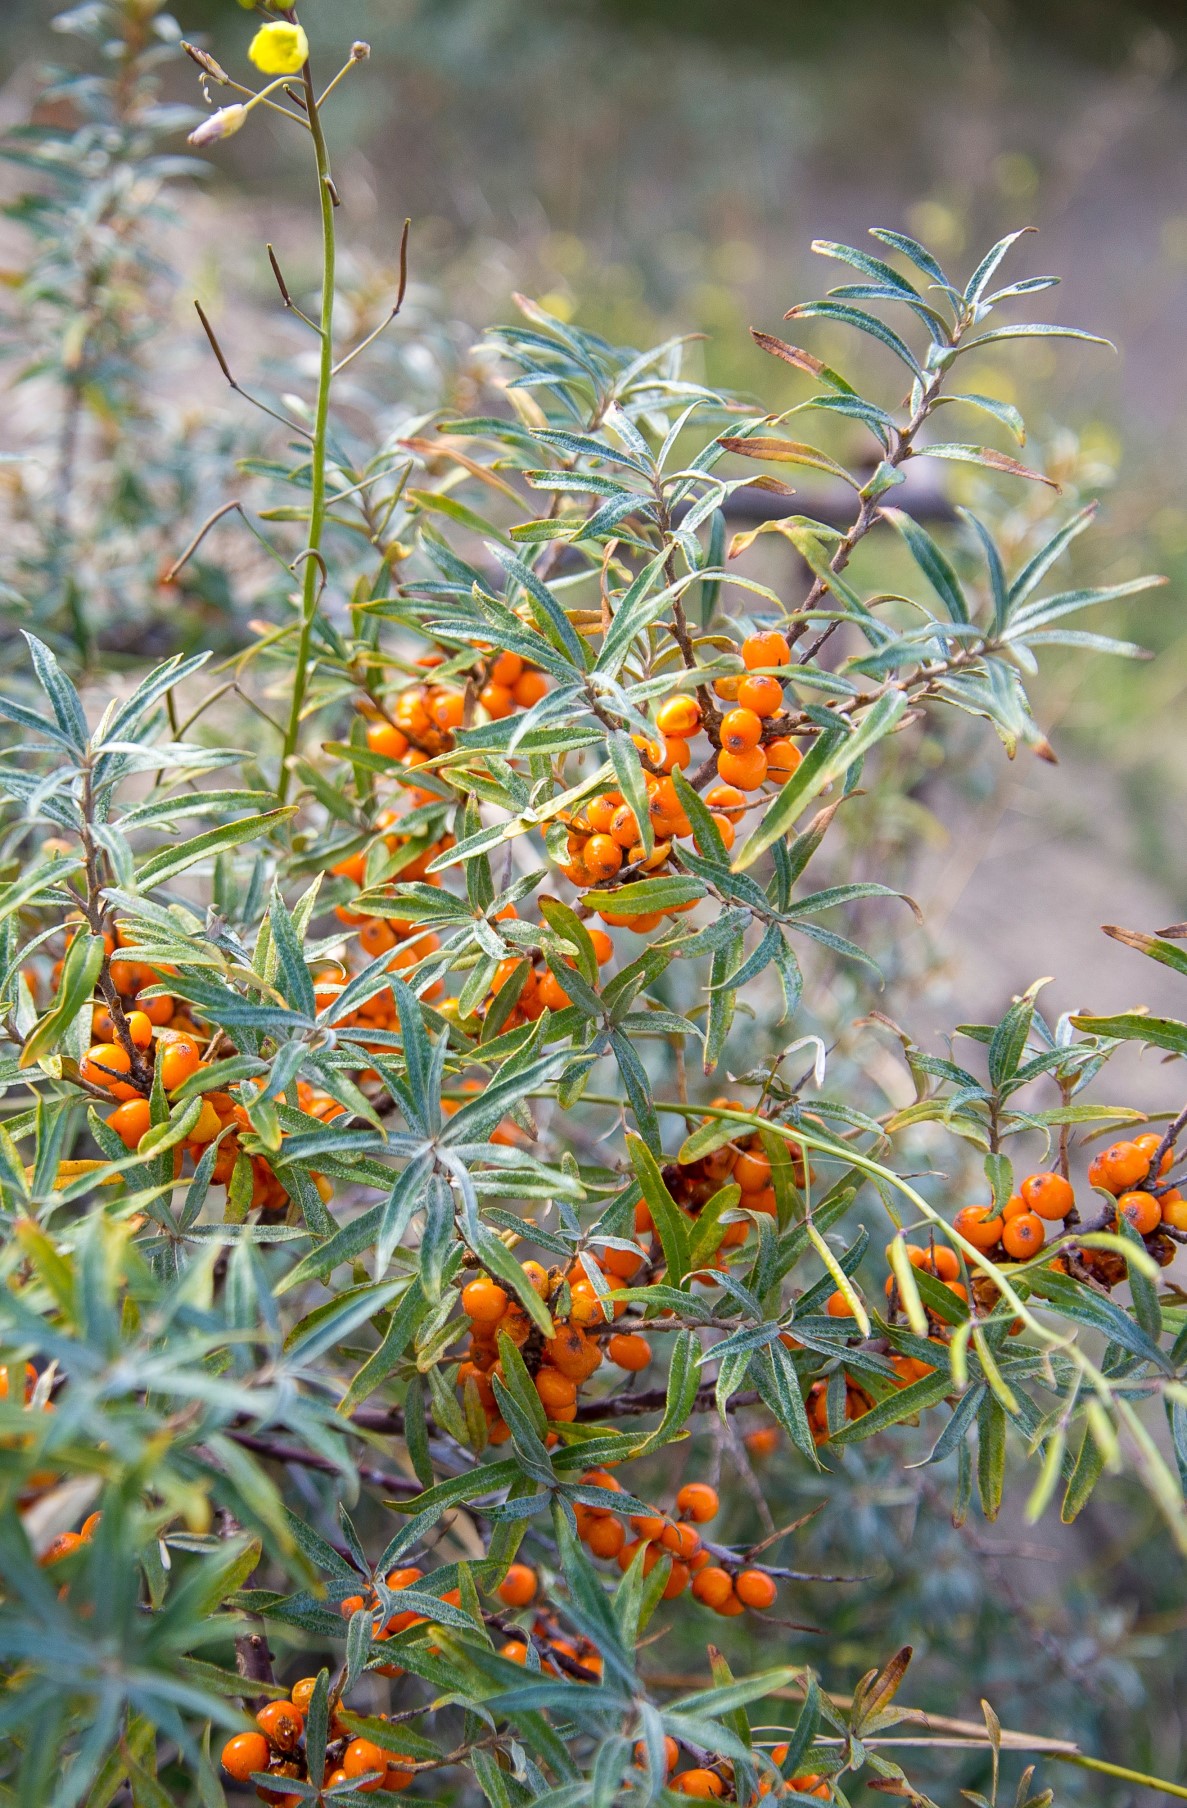 Sea buckthorn berry oil, found in our First Aid Salve, is full of different carotenoids that can help even skin complexion and age spots and can help heal cuts, wounds, and scars.